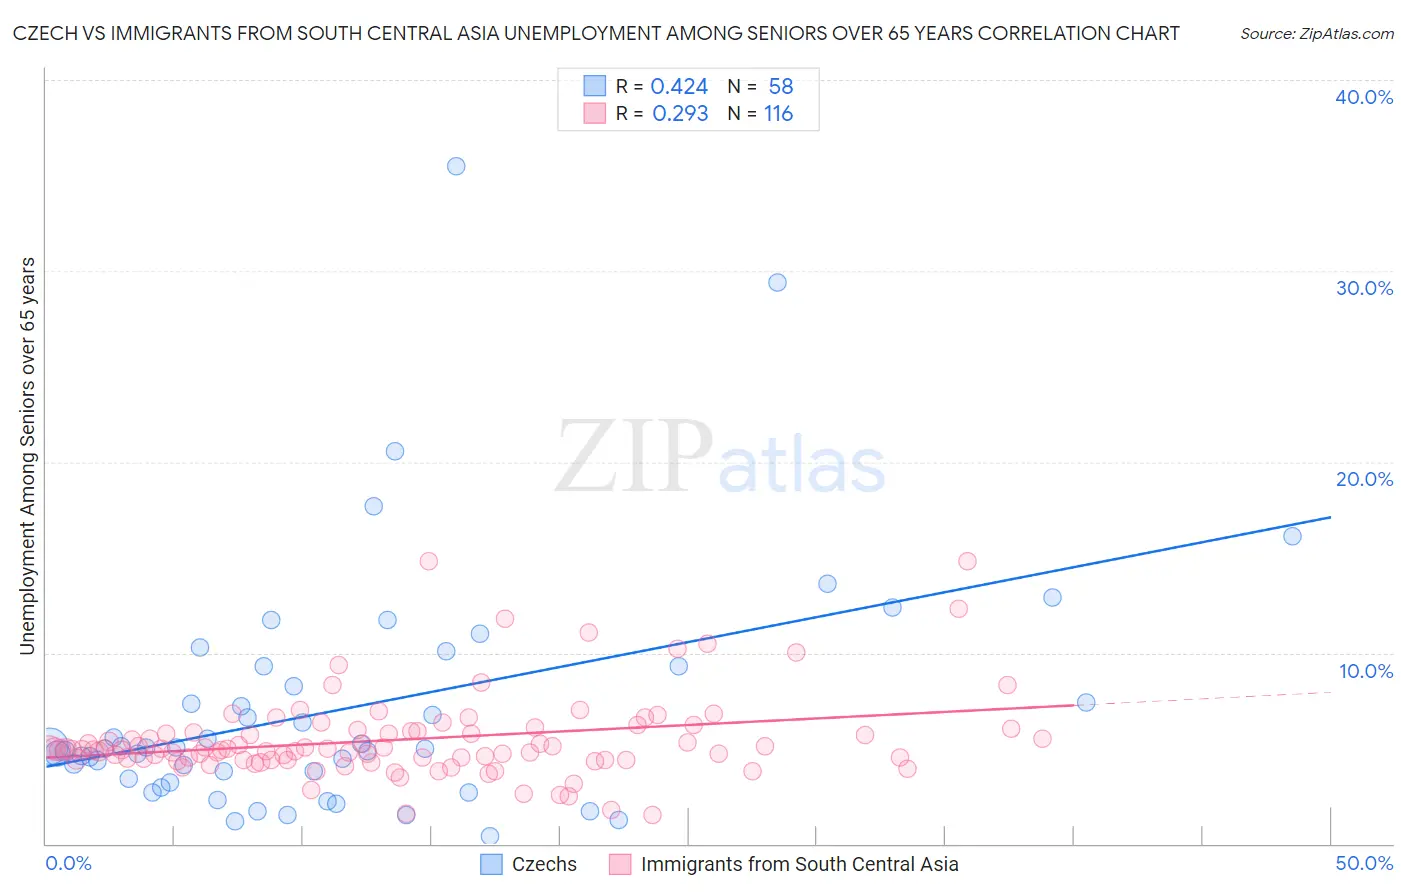 Czech vs Immigrants from South Central Asia Unemployment Among Seniors over 65 years